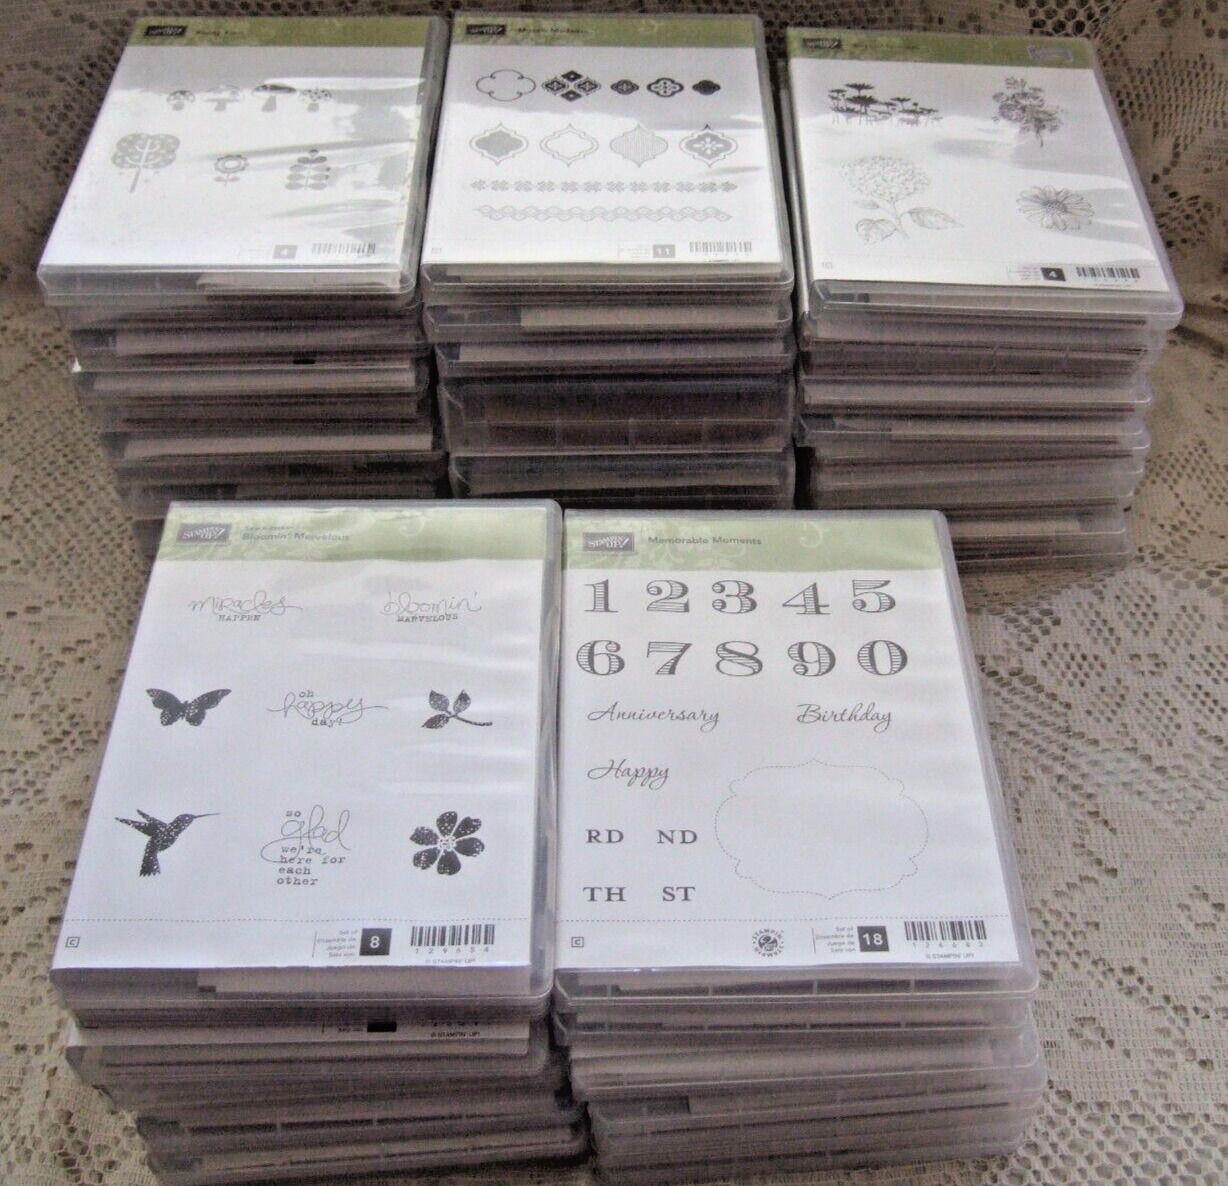 NEW & UNUSED   STAMPIN\' UP RUBBER STAMP SETS   LOT OF 44 - OVER 340 STAMPS